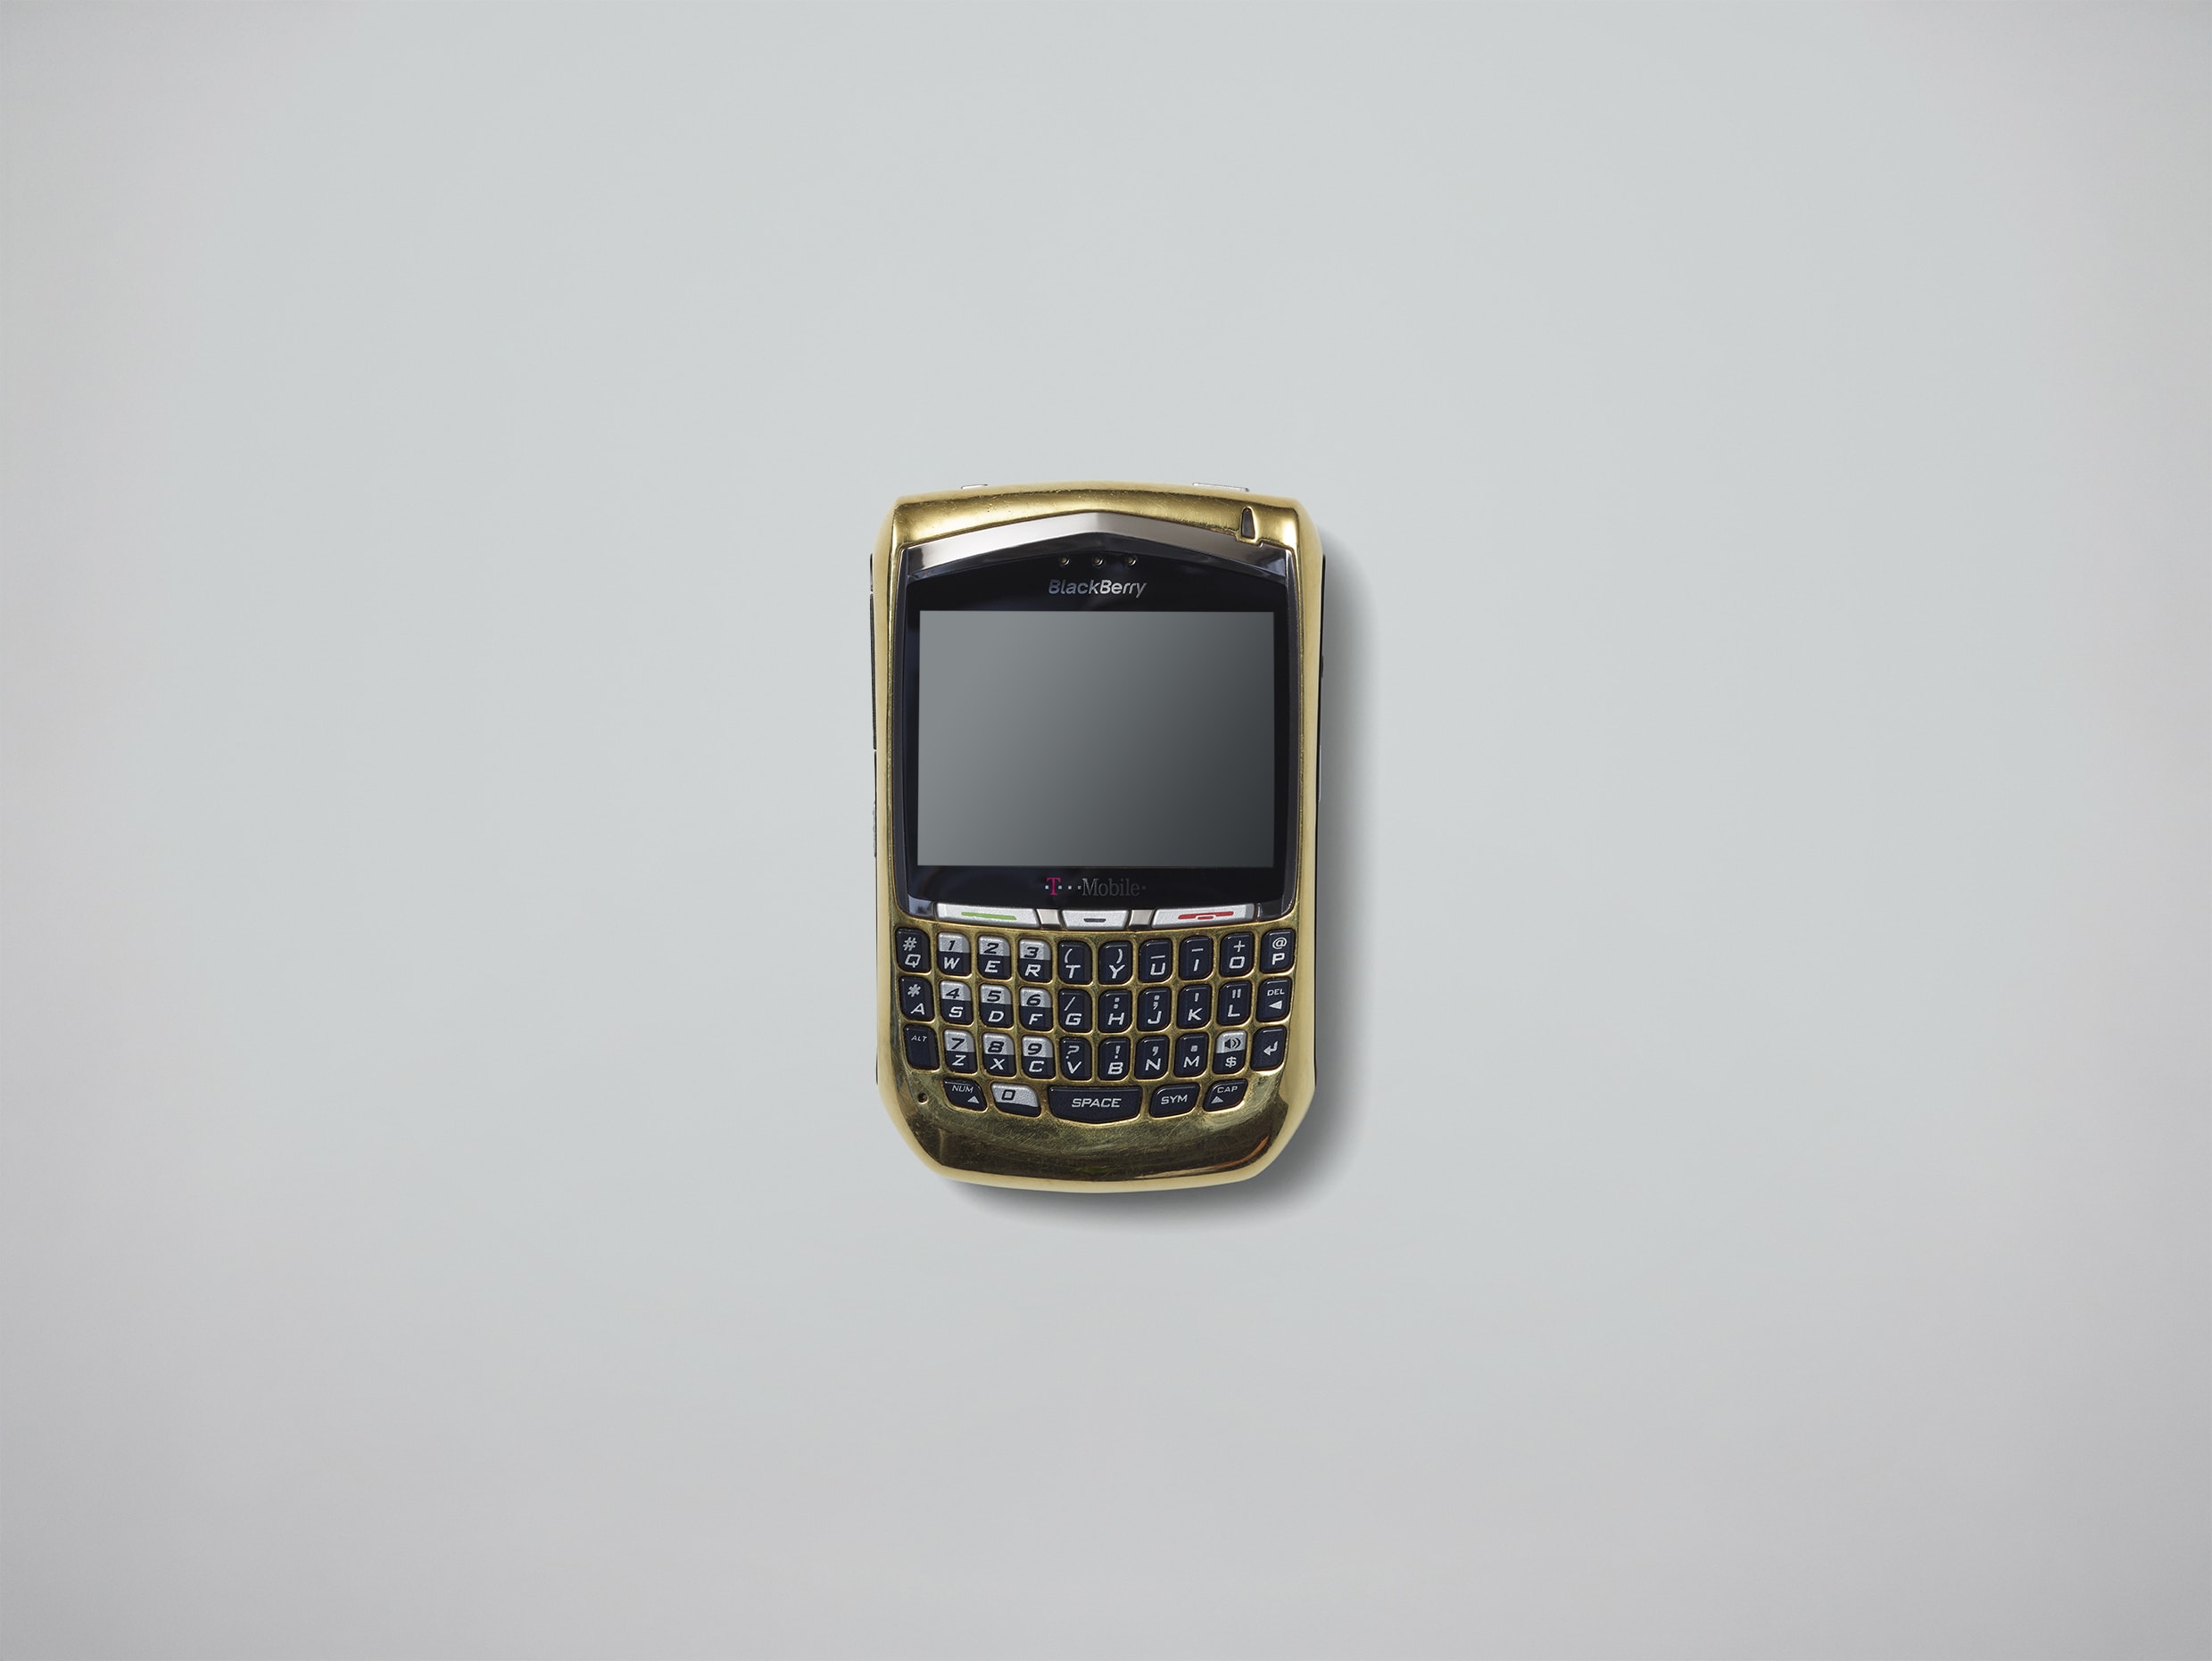 A BlackBerry phone is pictured